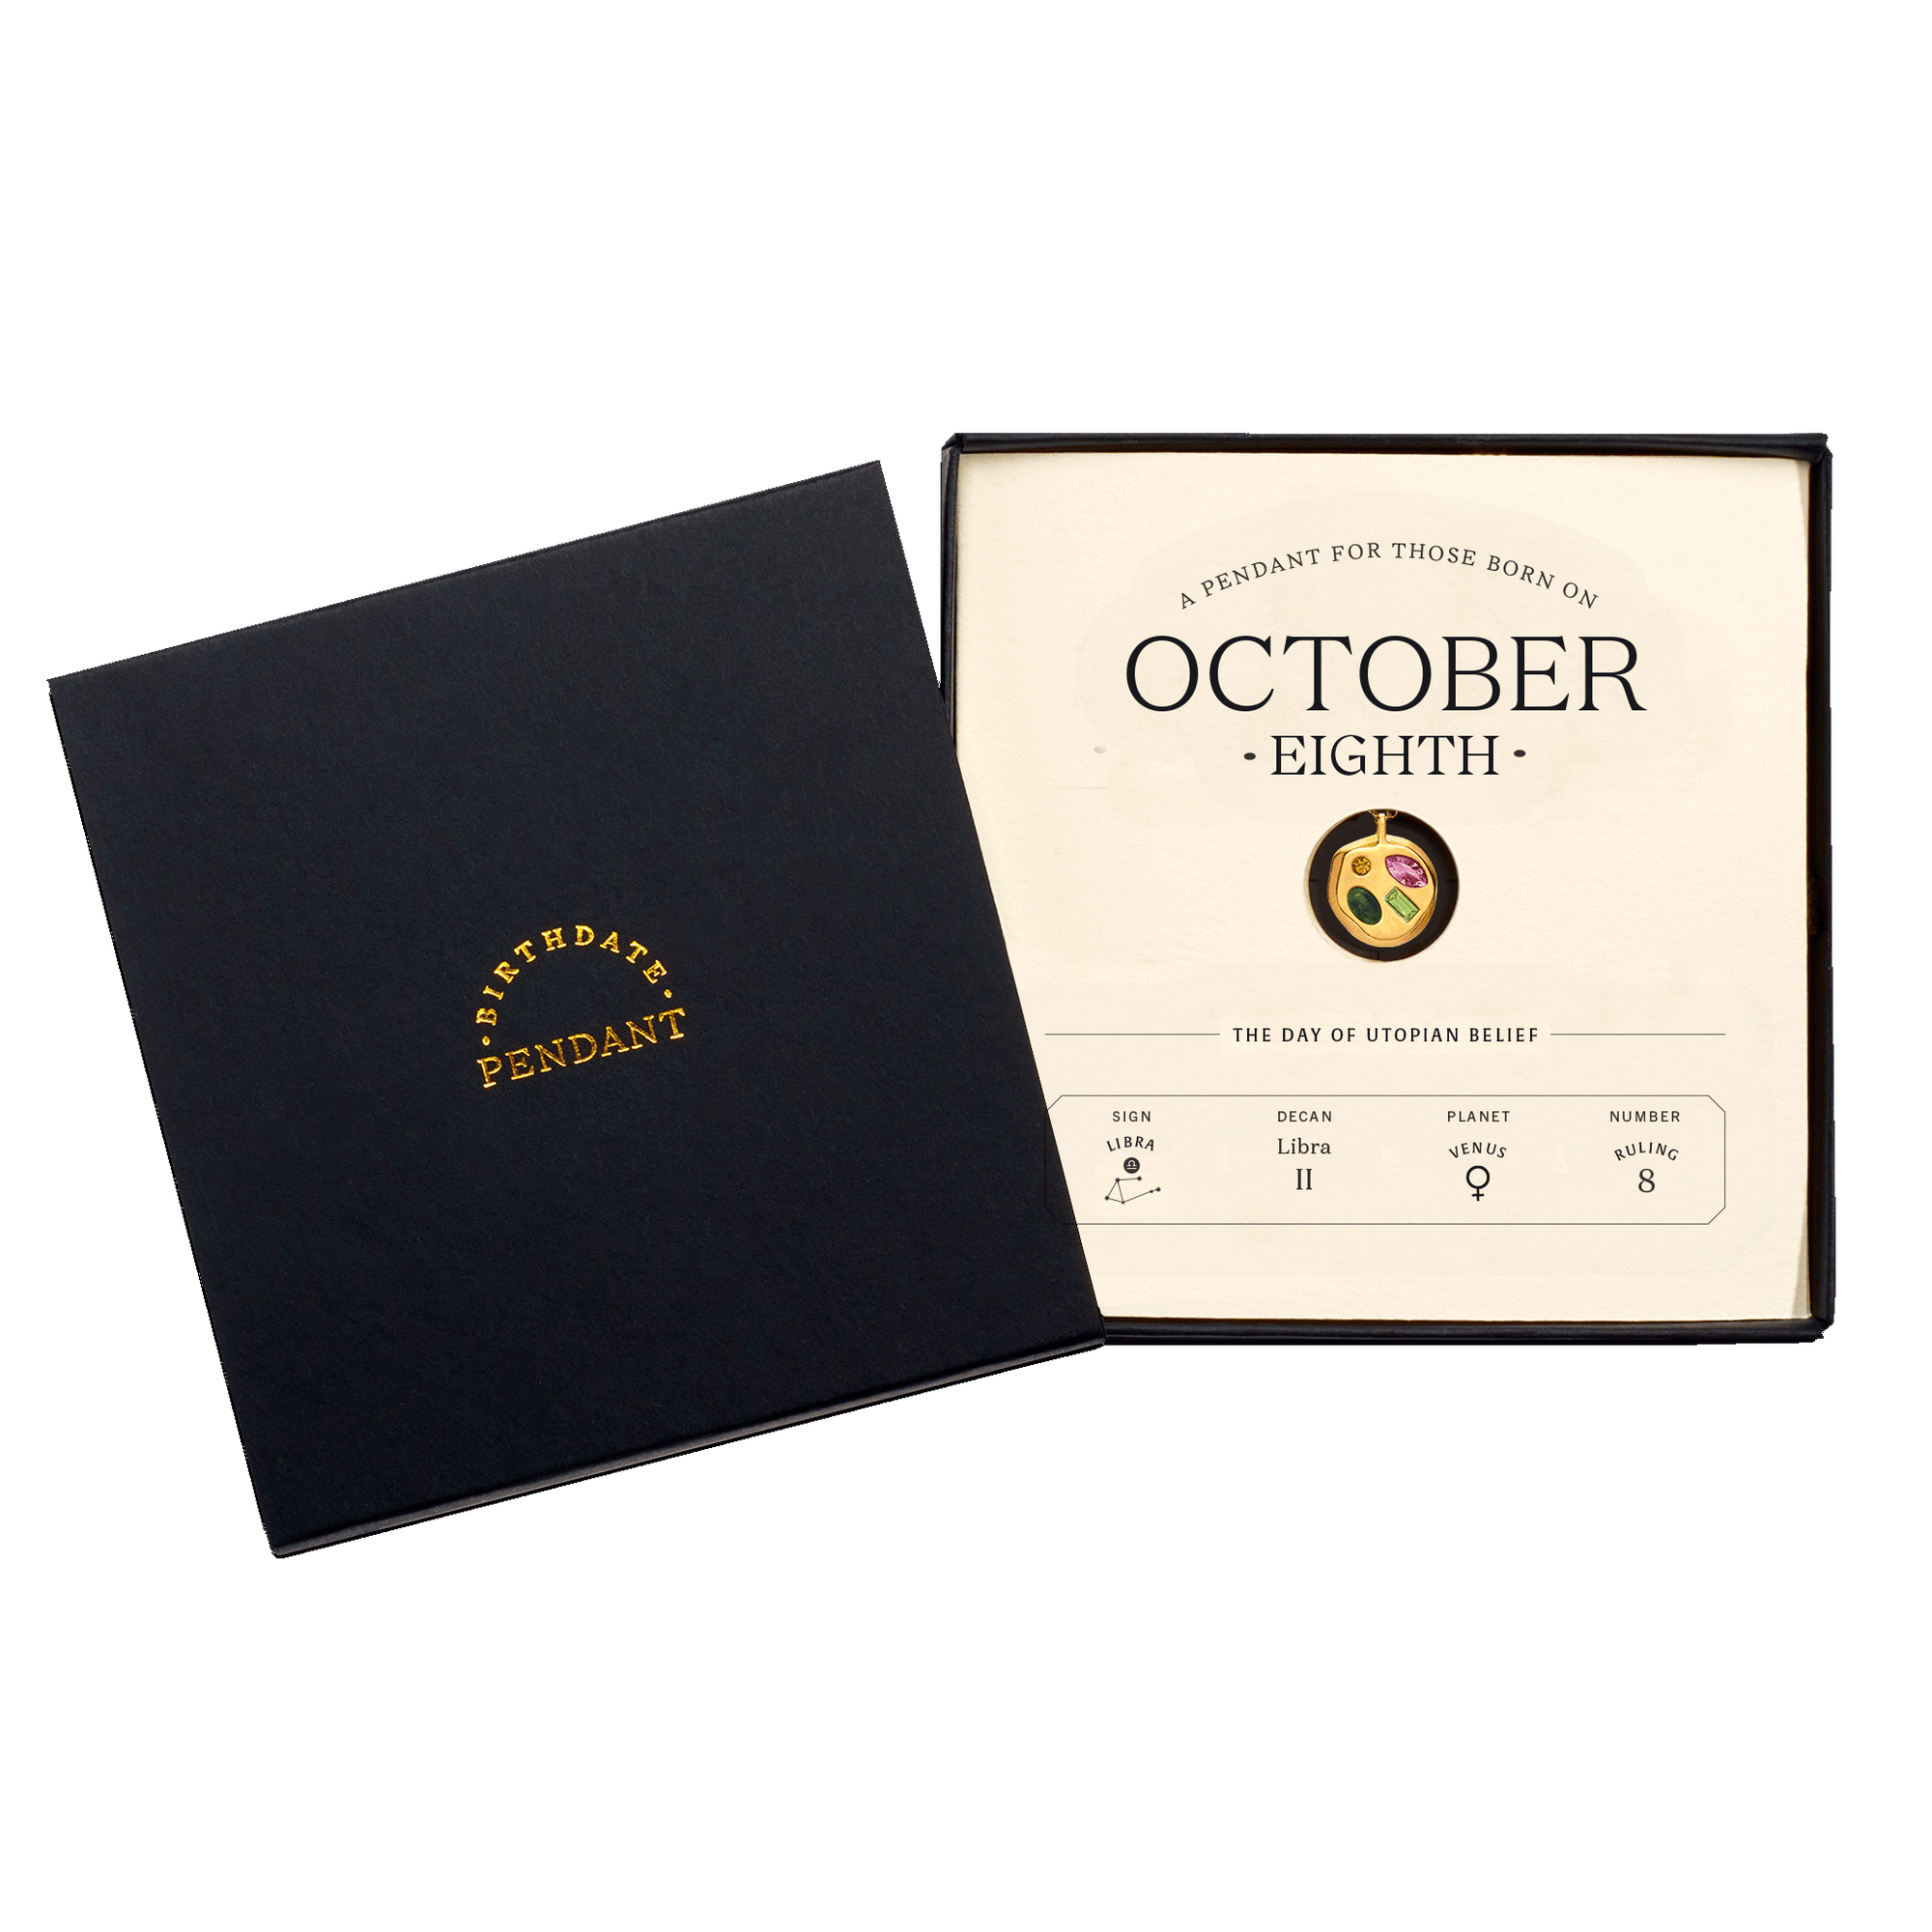 The October Eighth Pendant inside its box